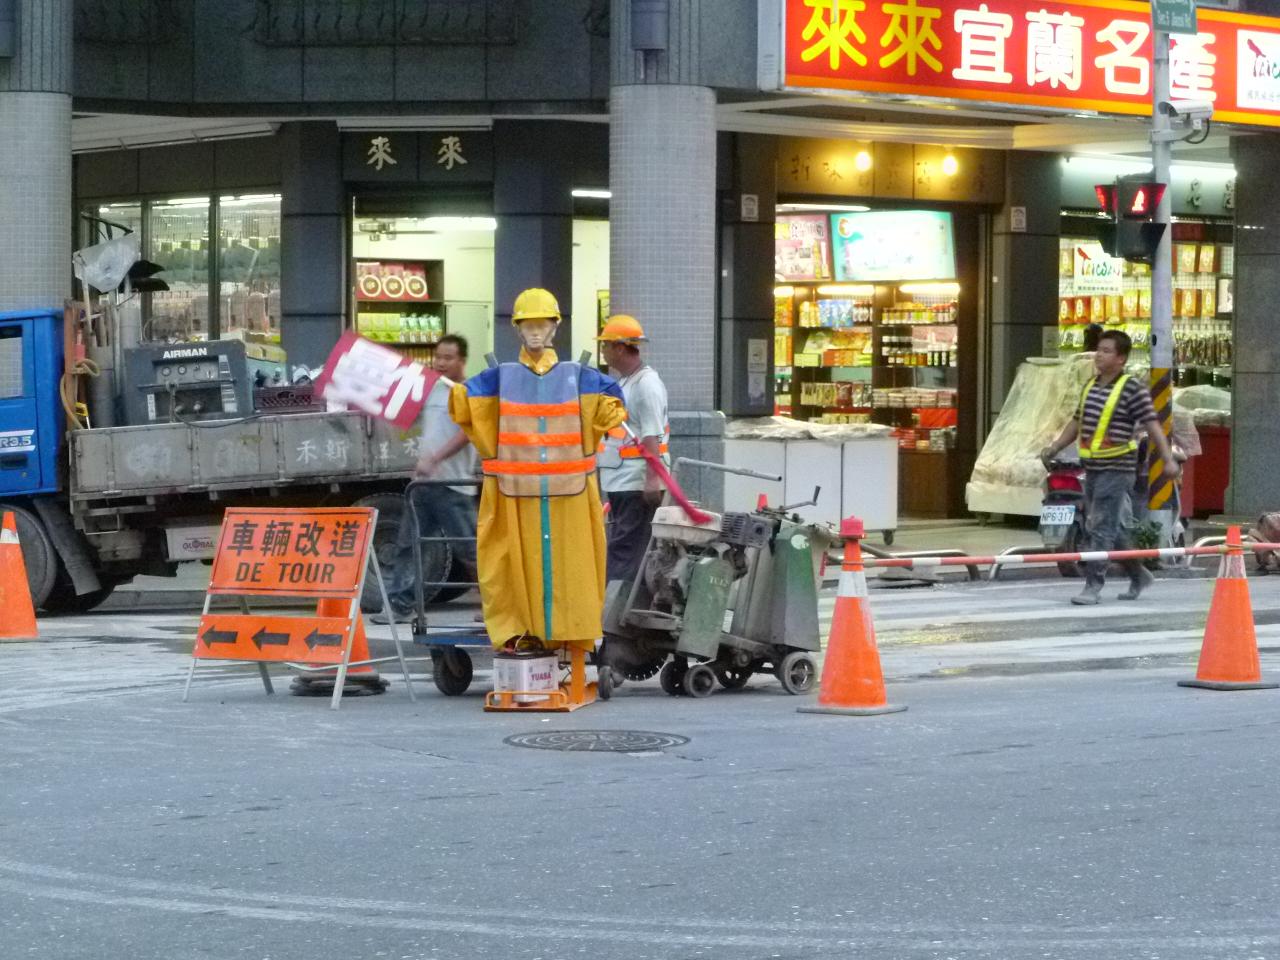 construction workers are on the sidewalk in front of buildings